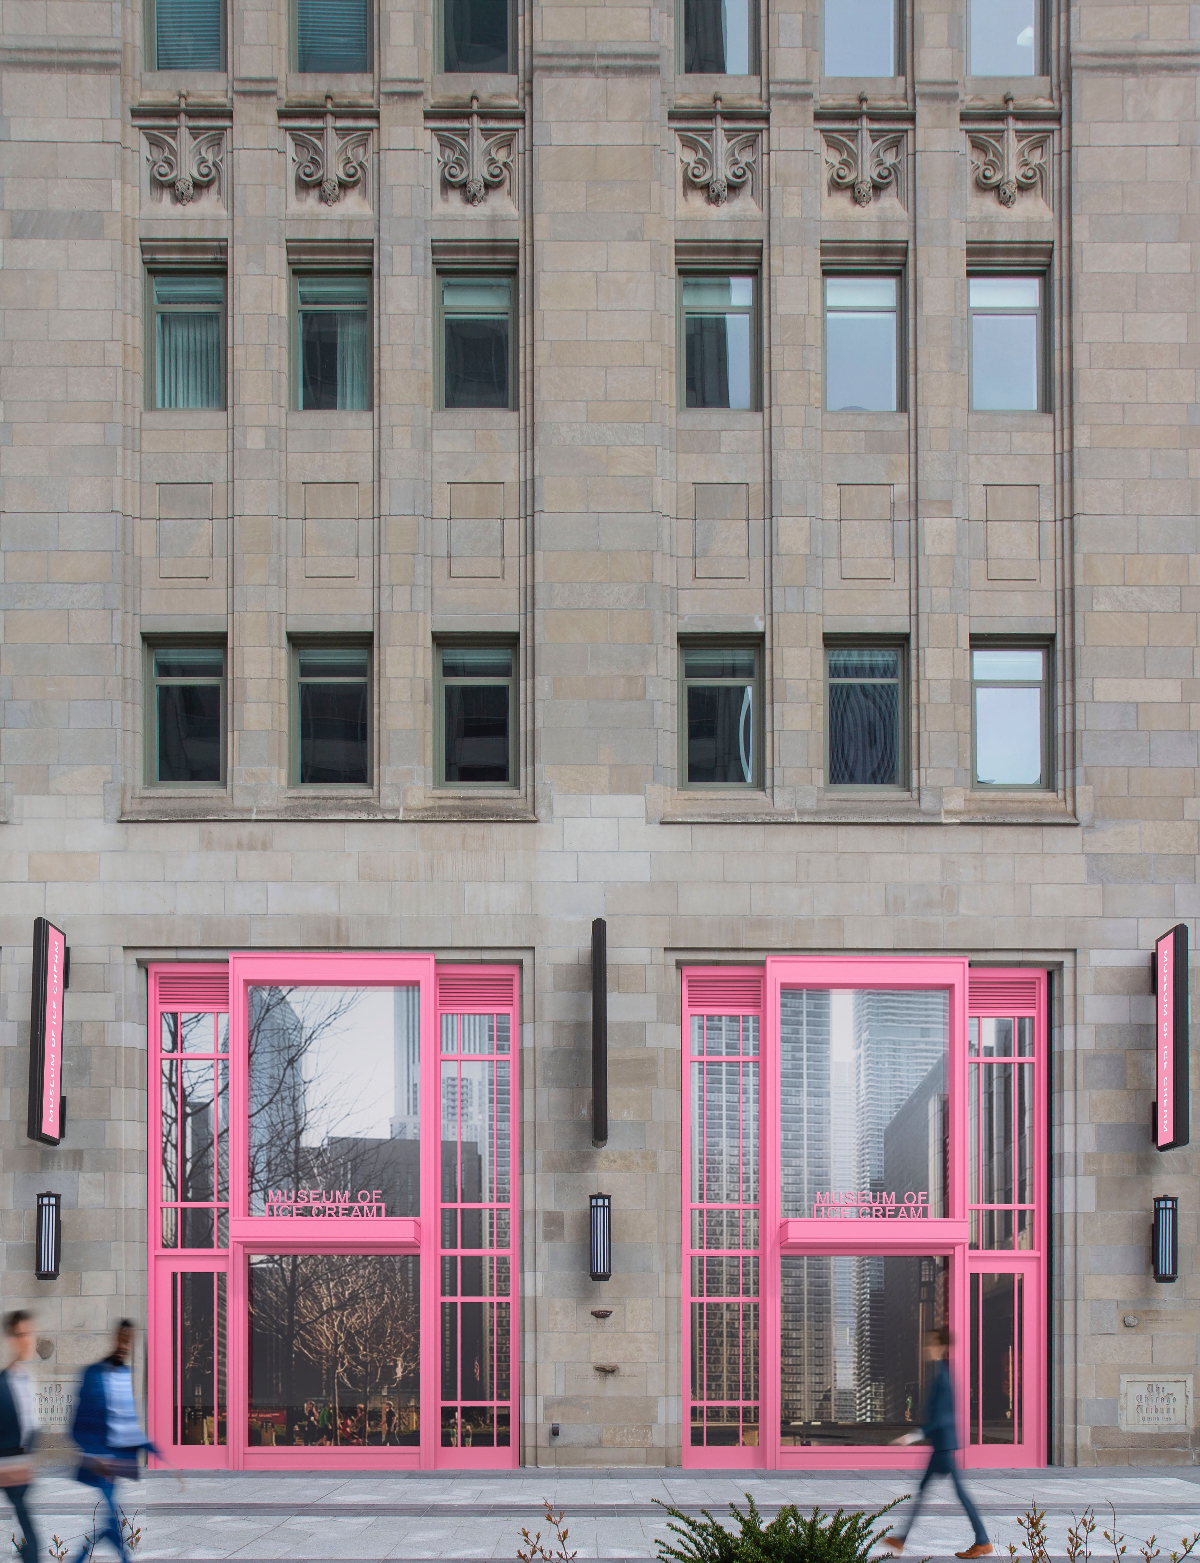 Museum of Ice Cream (MOIC) Chicago Announces Grand Opening Date and Ticket Sales